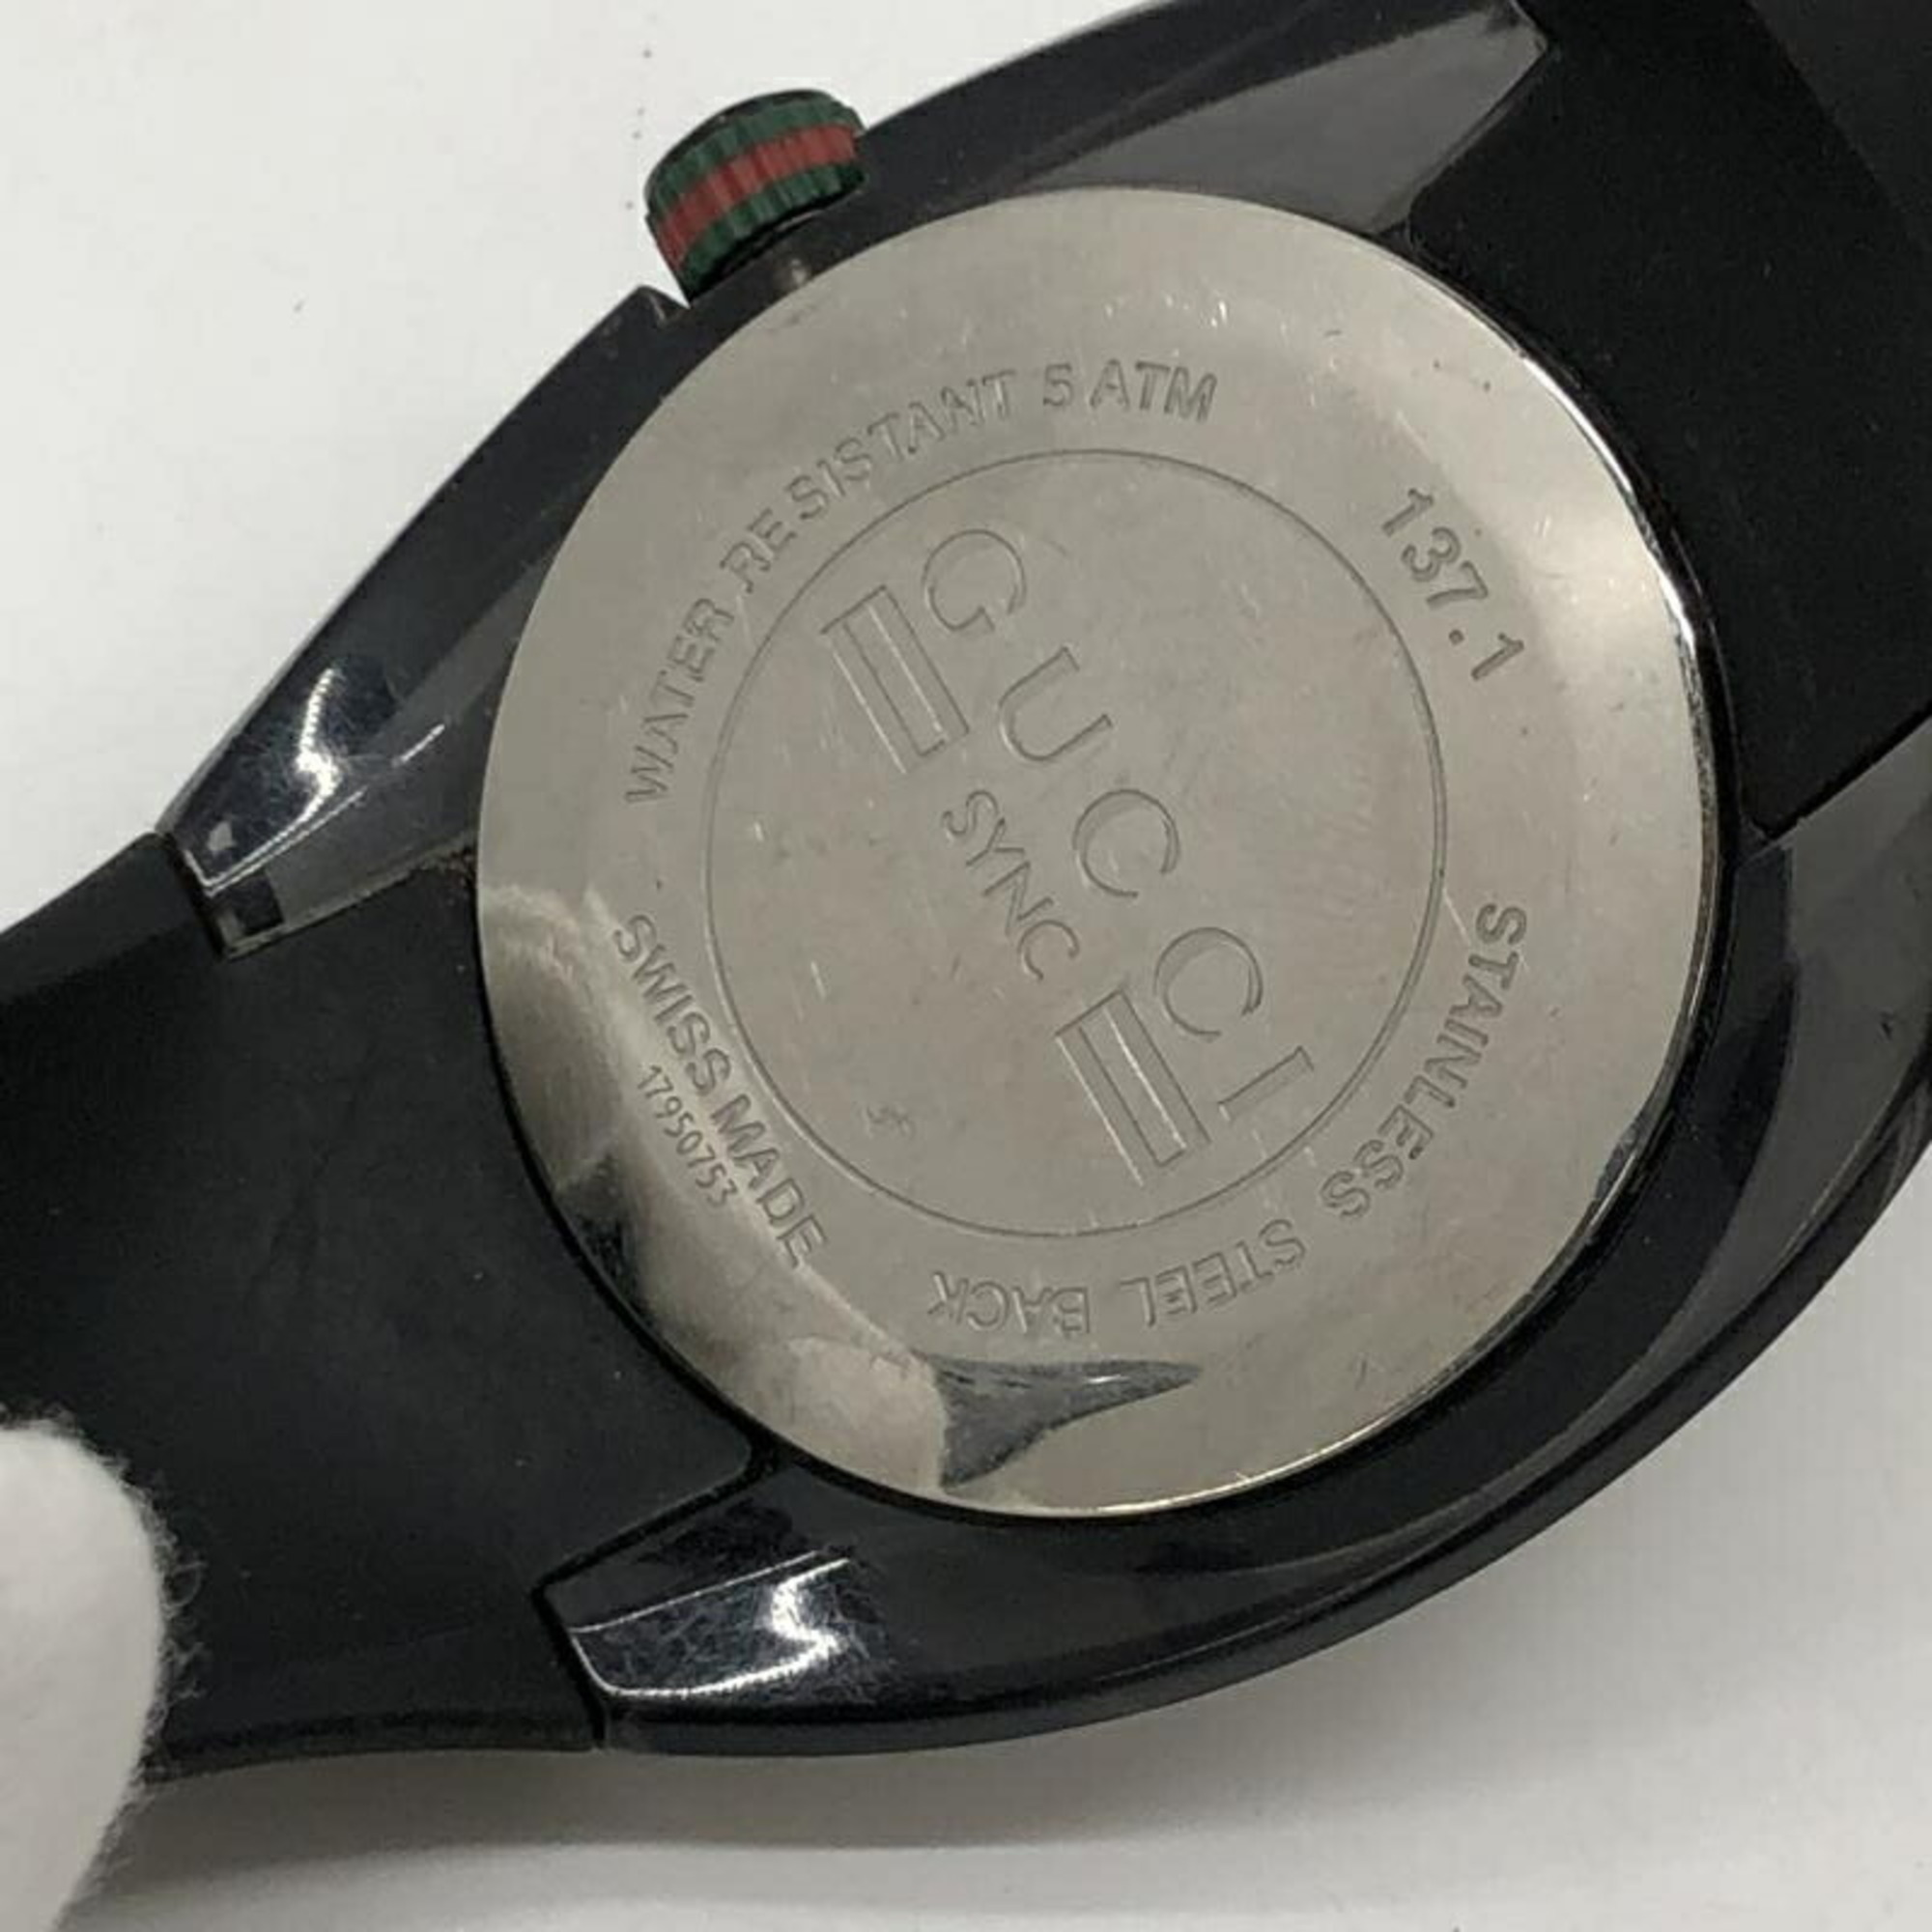 GUCCI SYNK 137.1 Quartz Gucci Sync Wristwatch with scratches on windshield